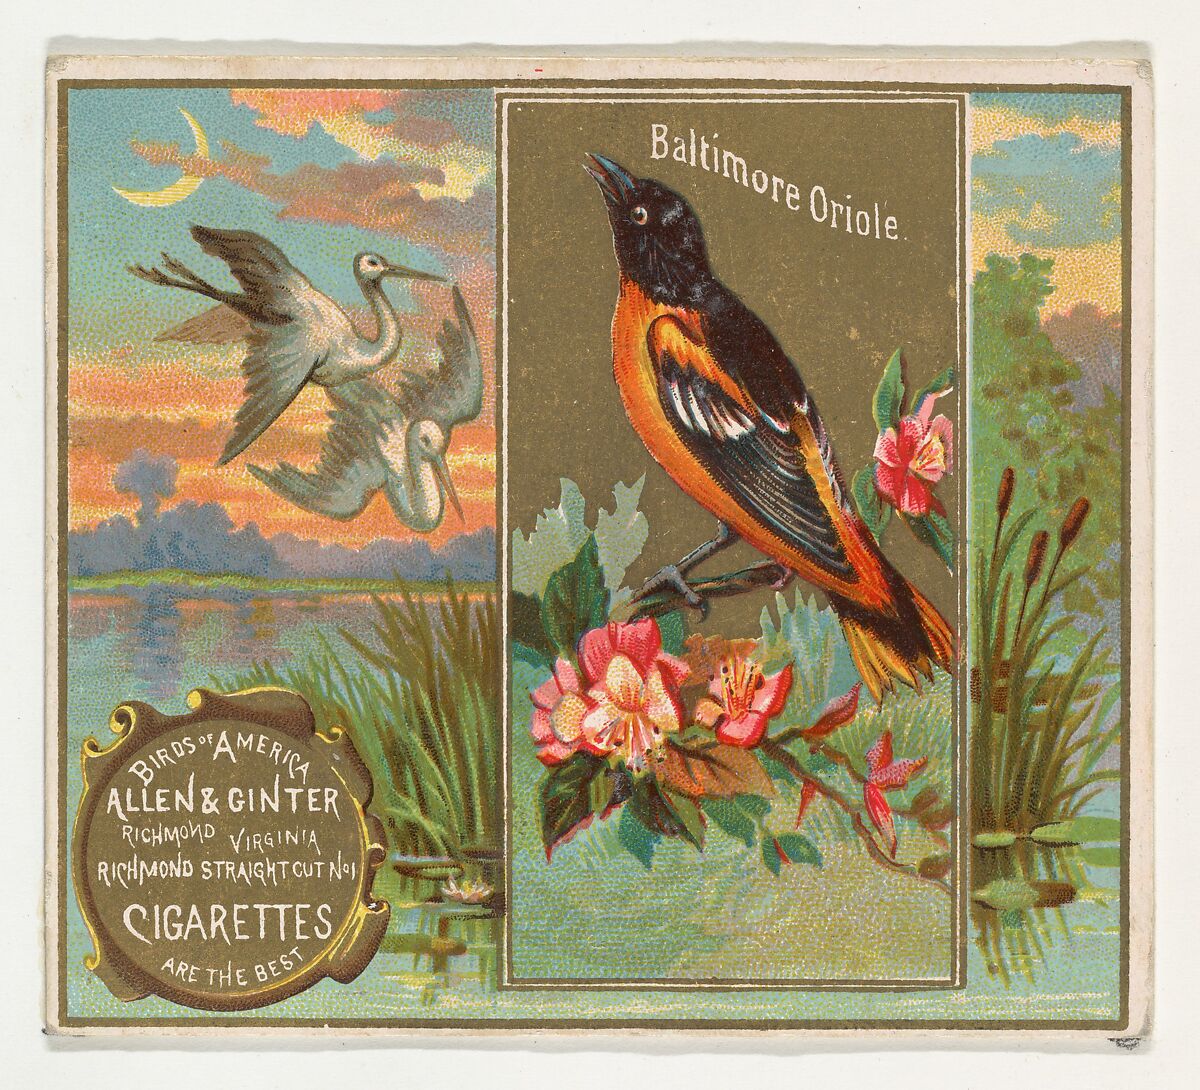 Baltimore Oriole, from the Birds of America series (N37) for Allen & Ginter Cigarettes, Issued by Allen &amp; Ginter (American, Richmond, Virginia), Commercial color lithograph 